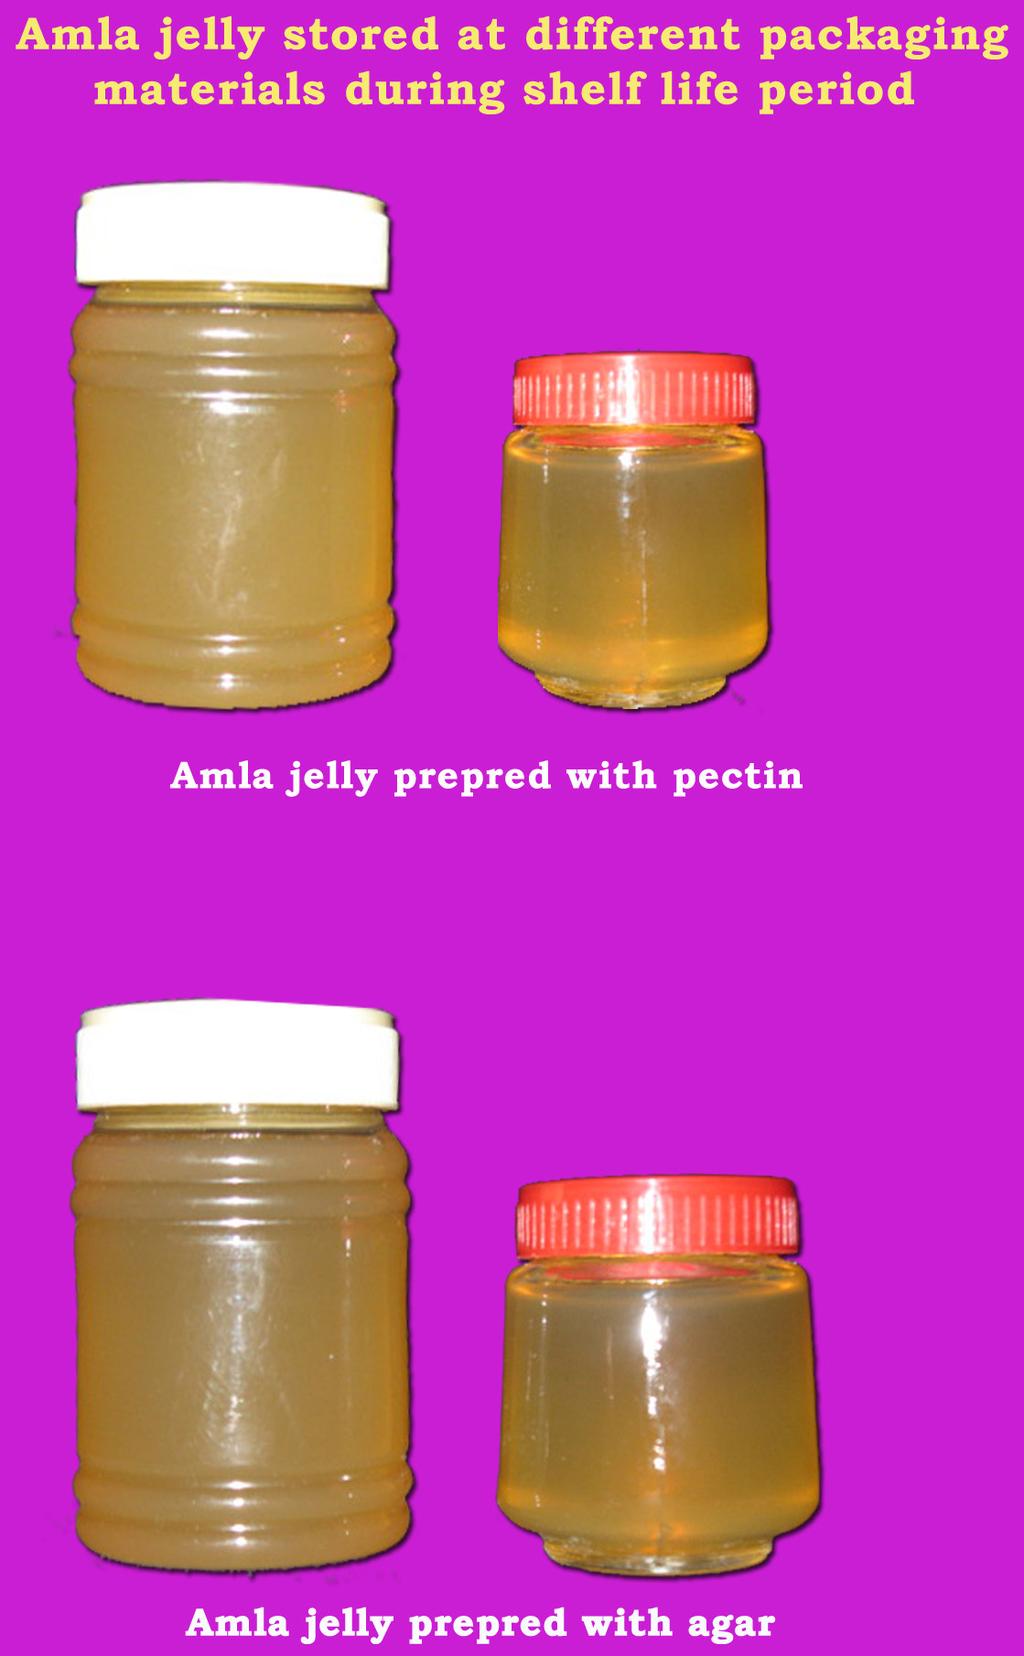 Storage Studies of Amla Products with 1, 1.5 and 2% of mint extract (T 2, 3.25, 3.26 and 3.24 mg/100 ml in amla squash treated with 10, 15 and 20% honey (T 3 and 3.28, 3.23 and 3.